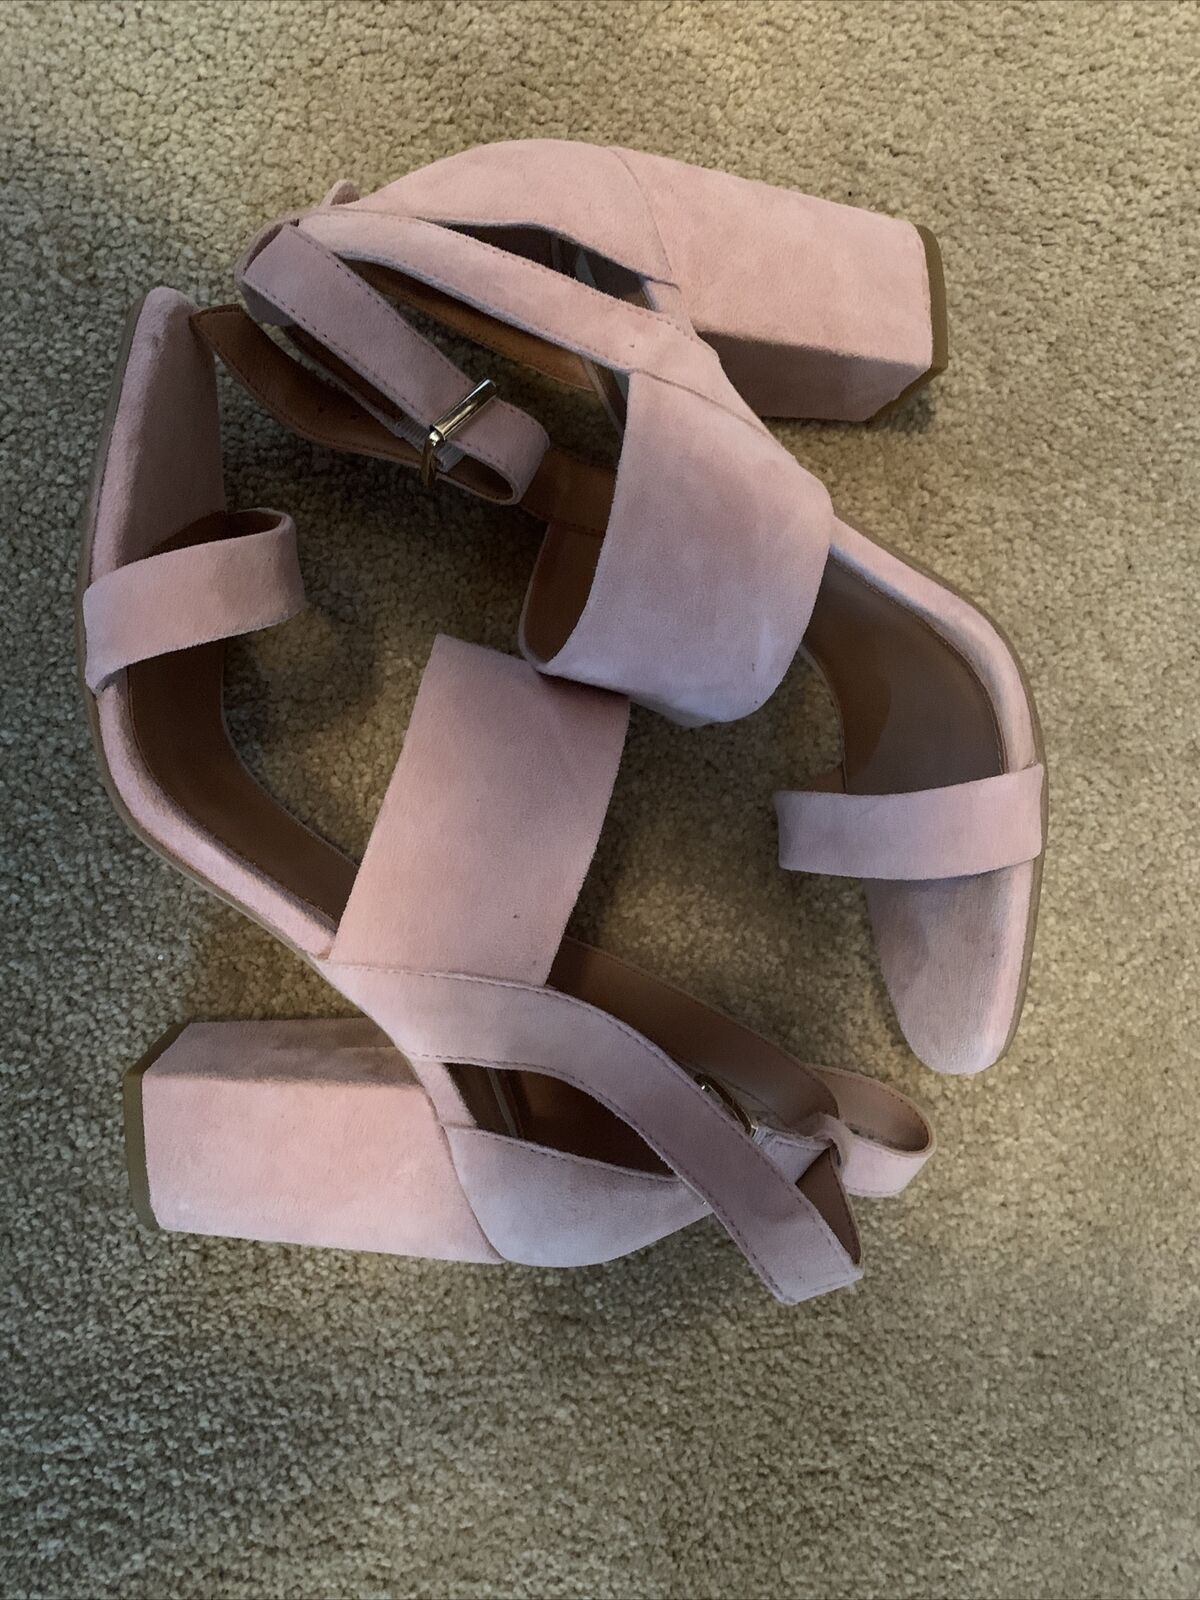 New Without Tags H&M LIGHT PINK Genuine SUEDE LEA… - image 6